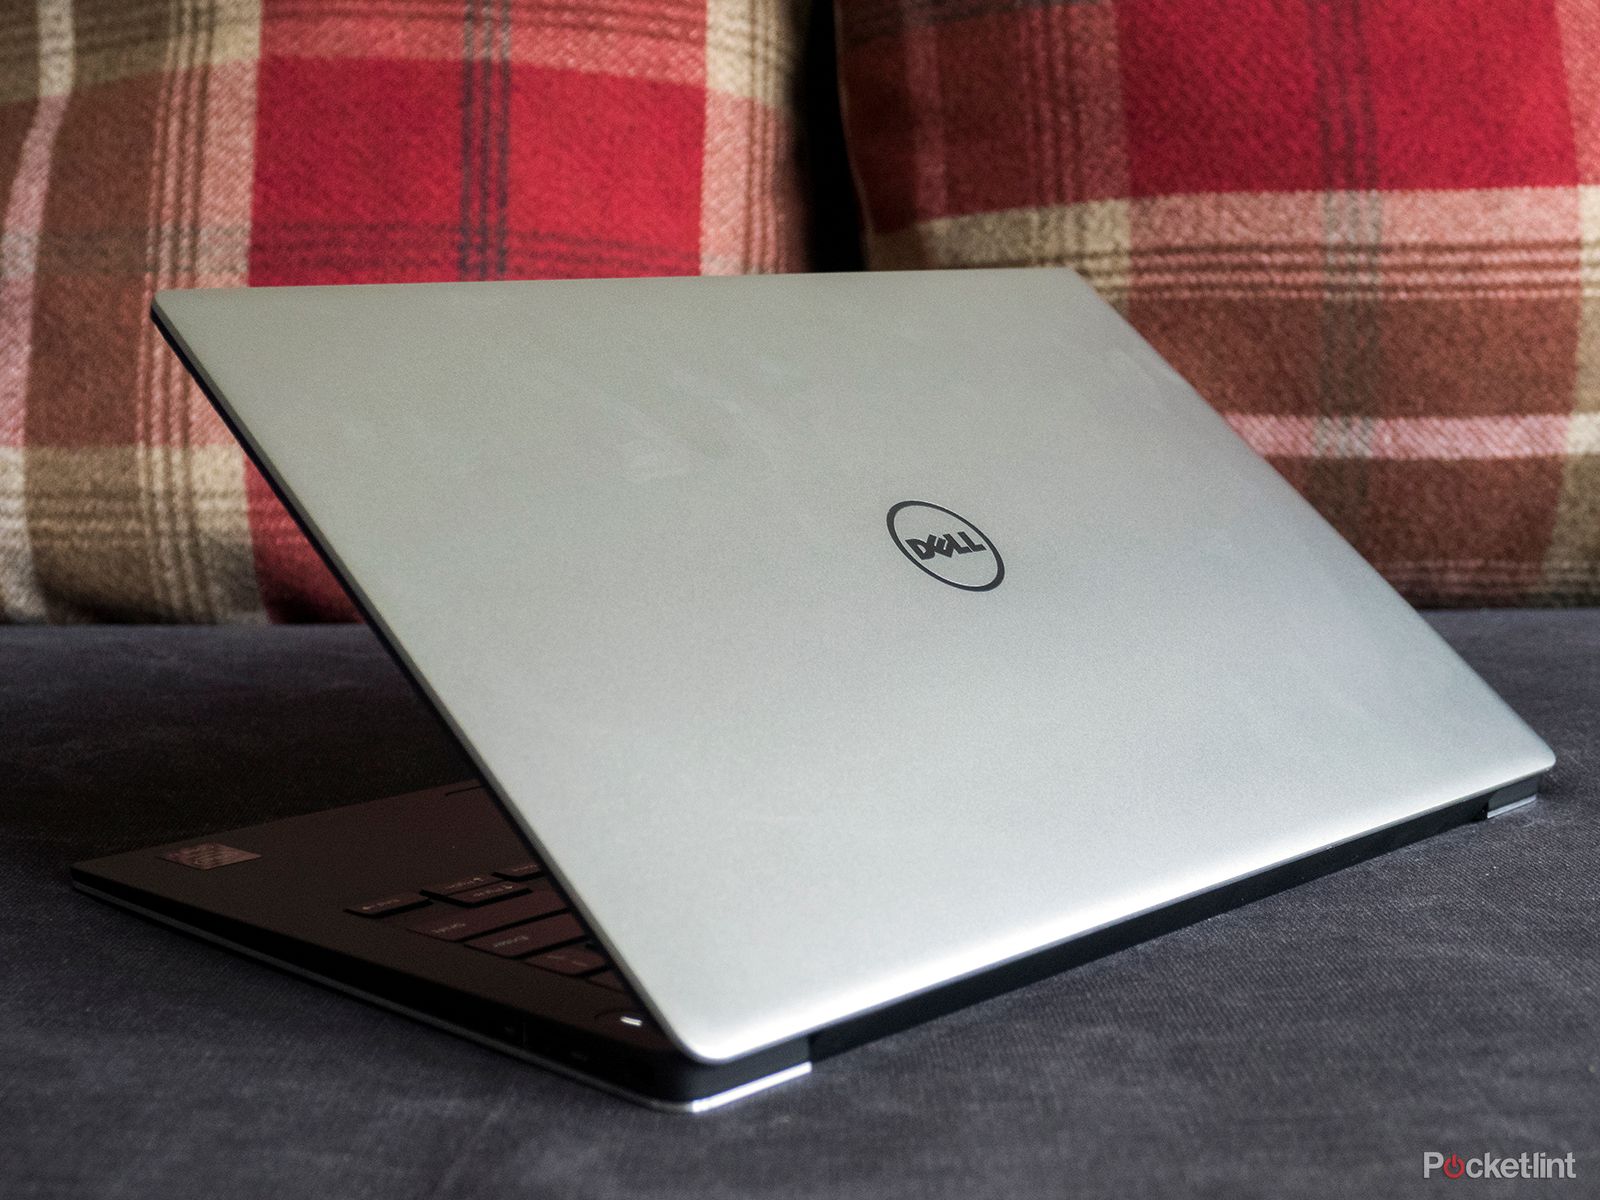 dell xps 13 review 2015 image 2